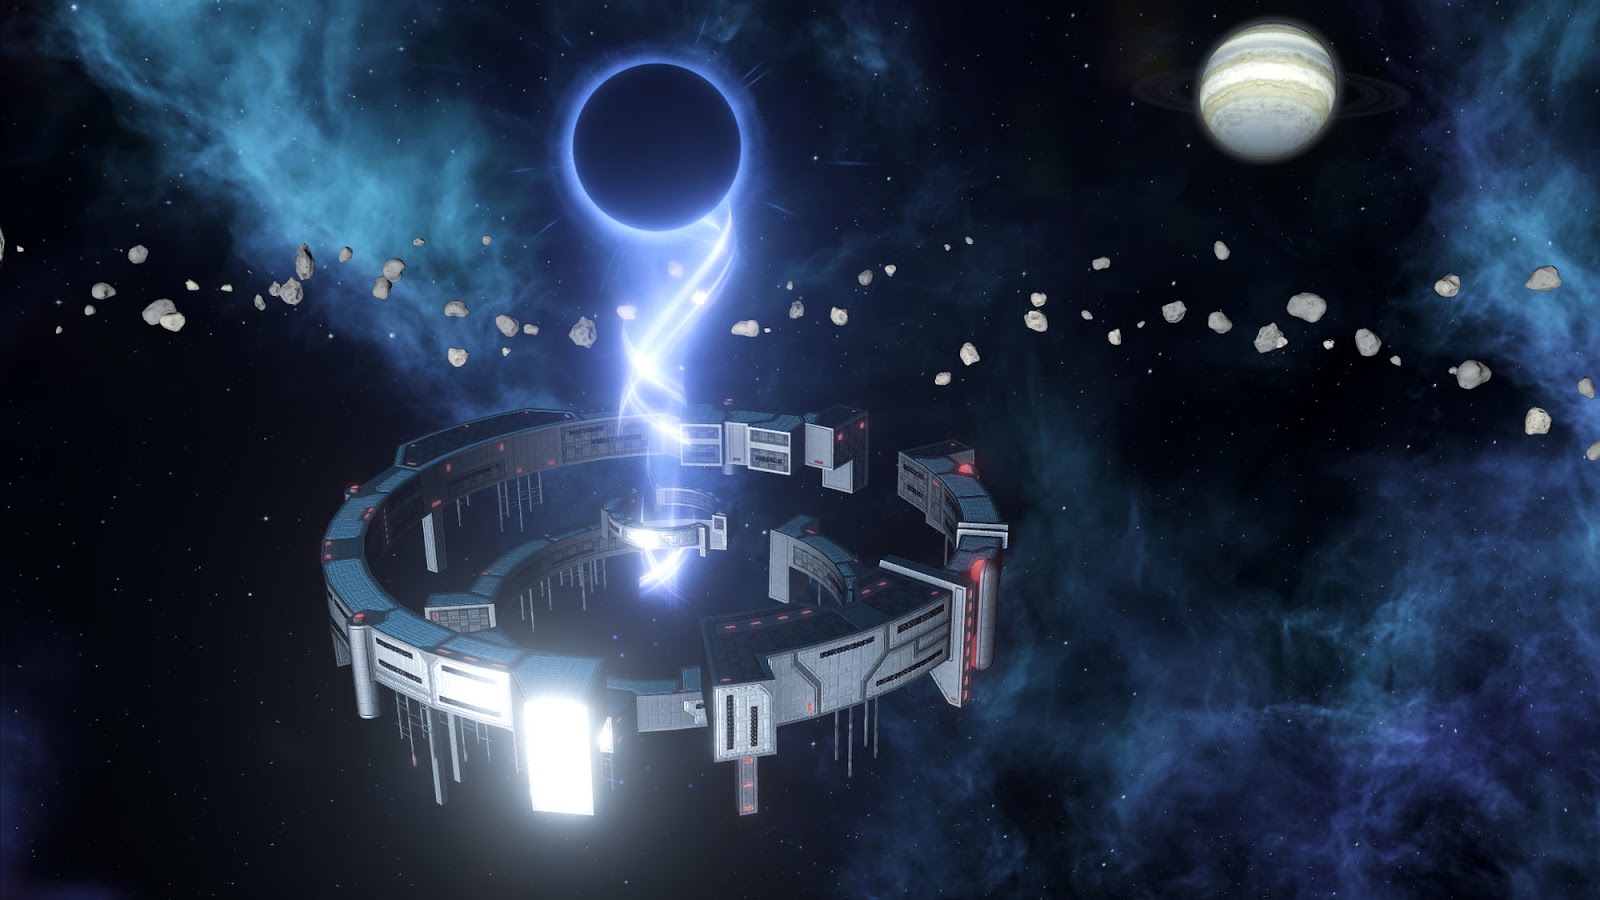 Stellaris's game director isn't thinking about a sequel: 'There's